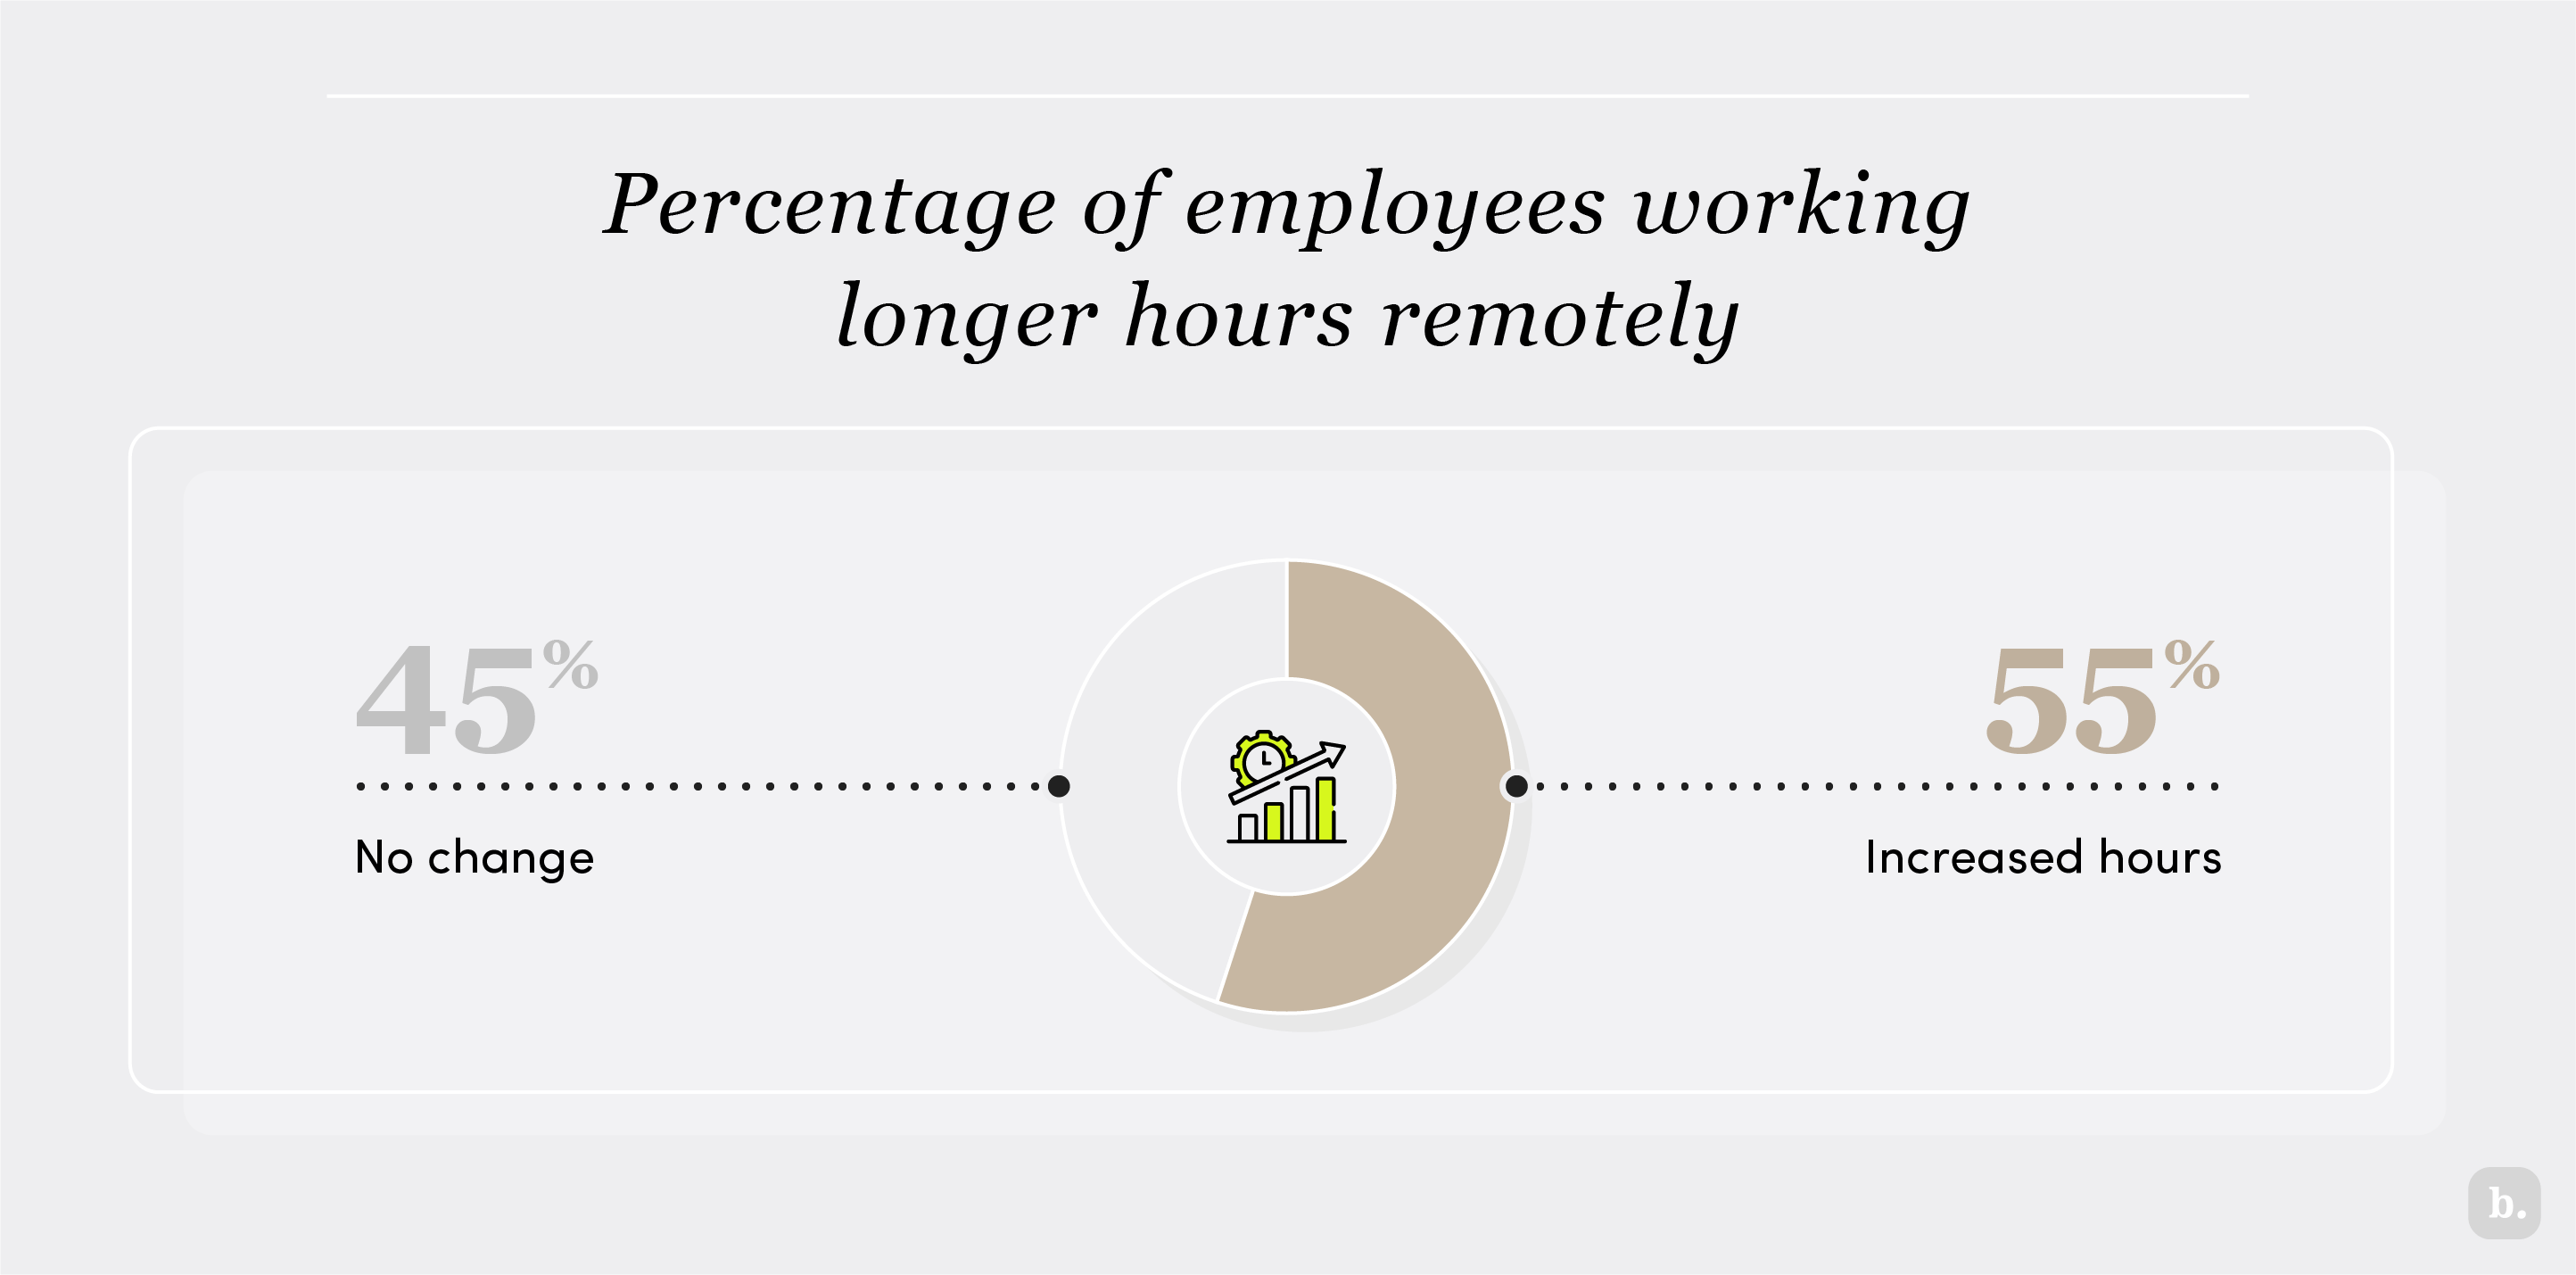 Percentage of employees working longer hours remotely is 